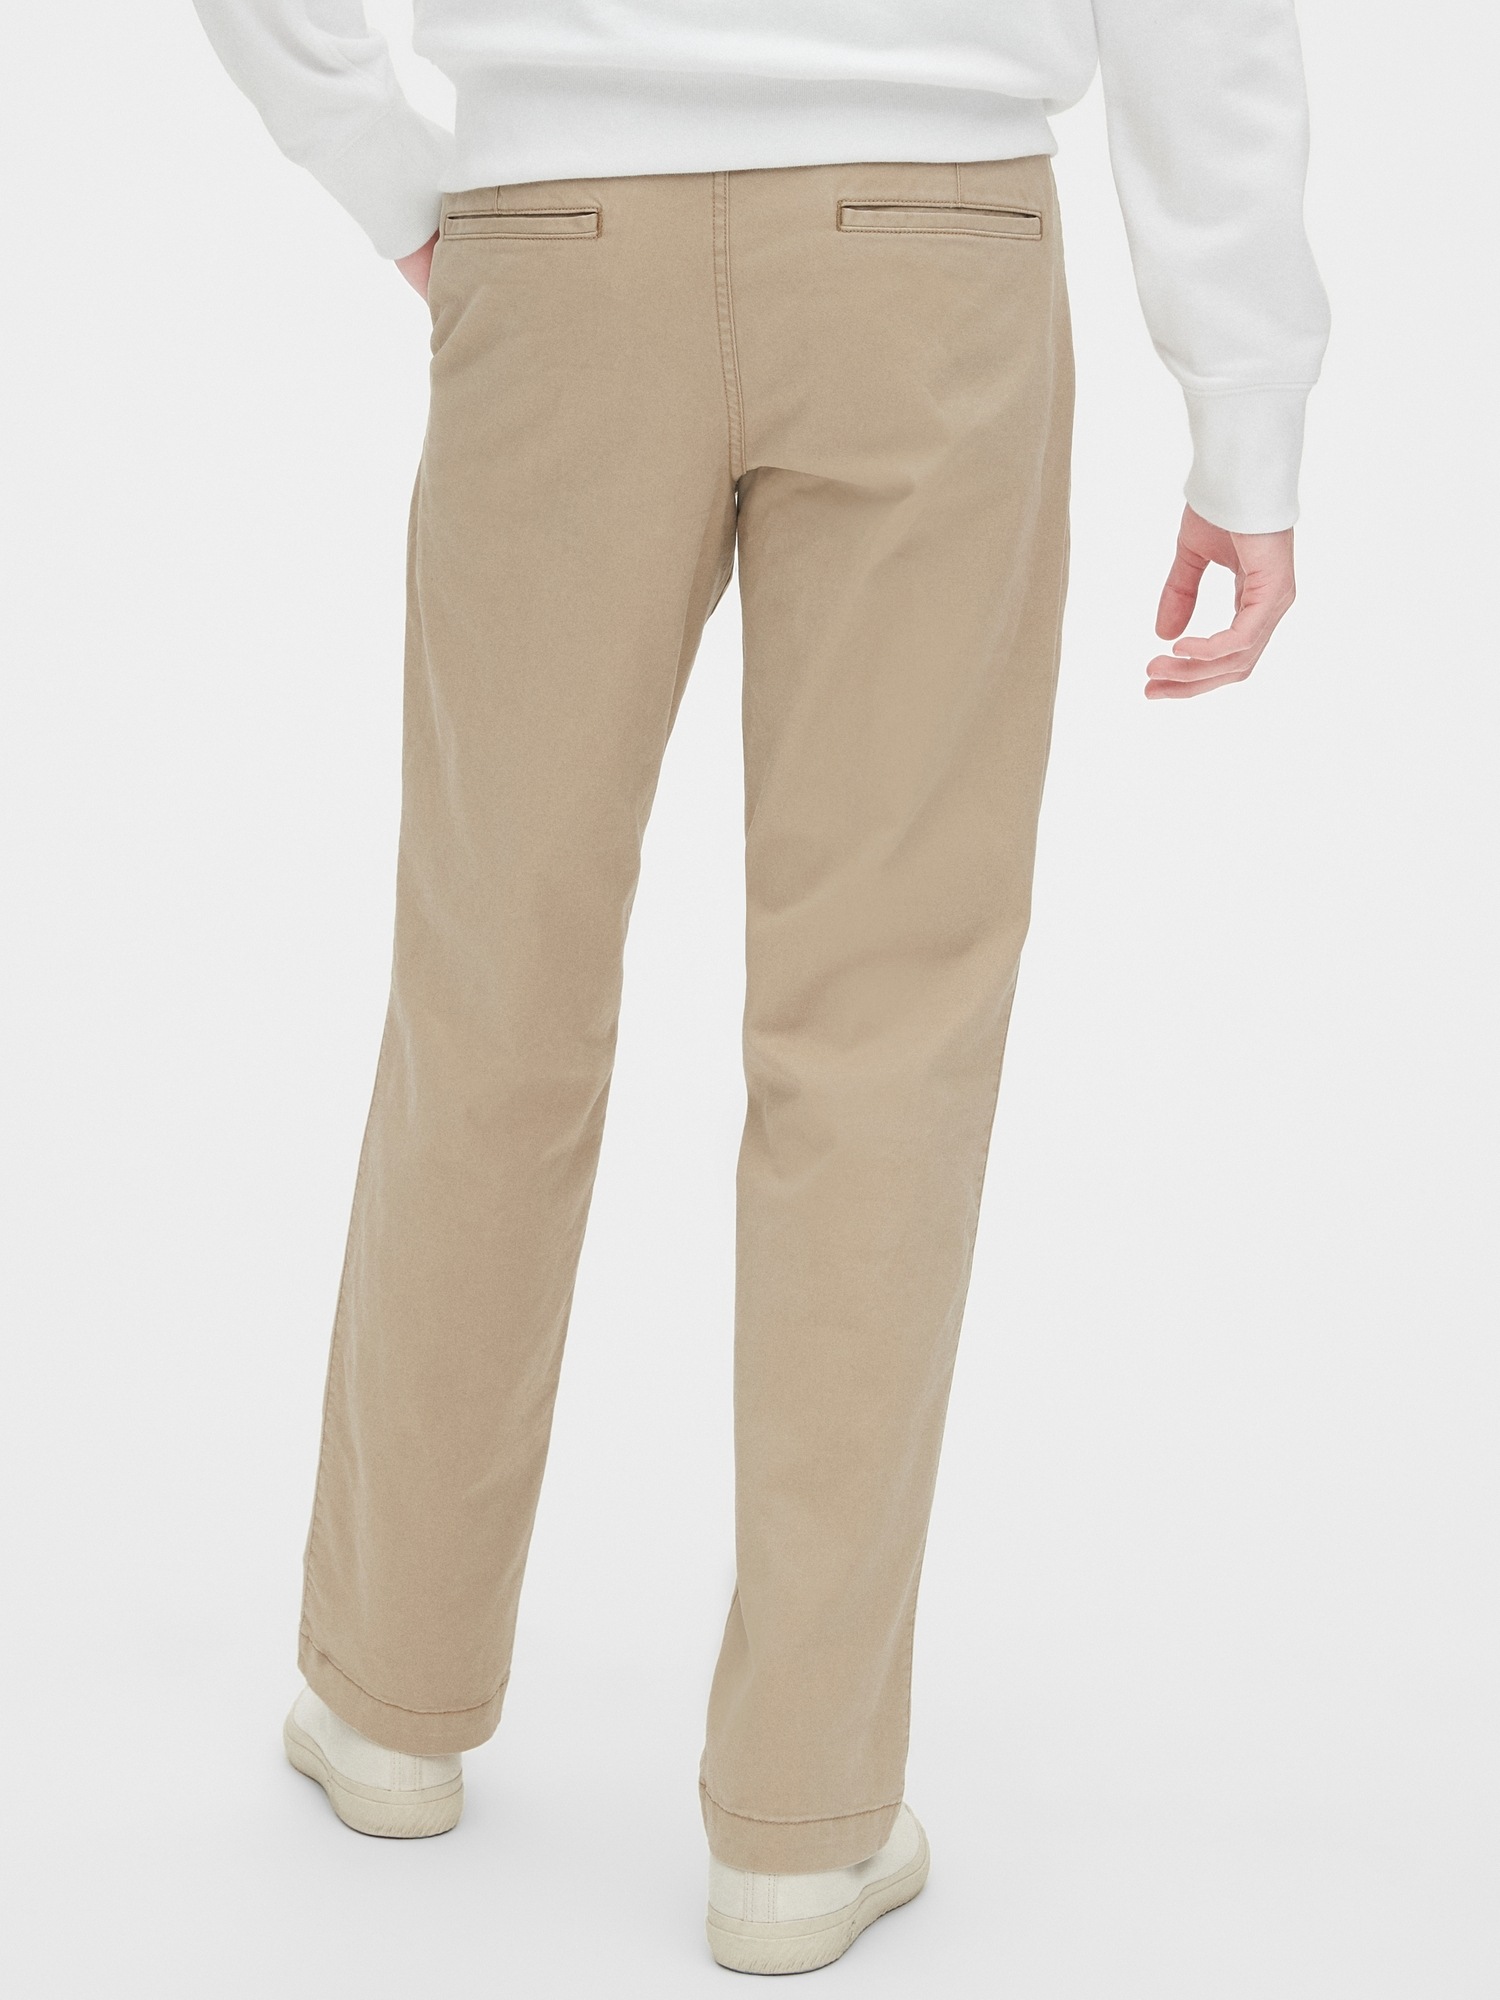 Vintage Khakis in Straight Fit with 